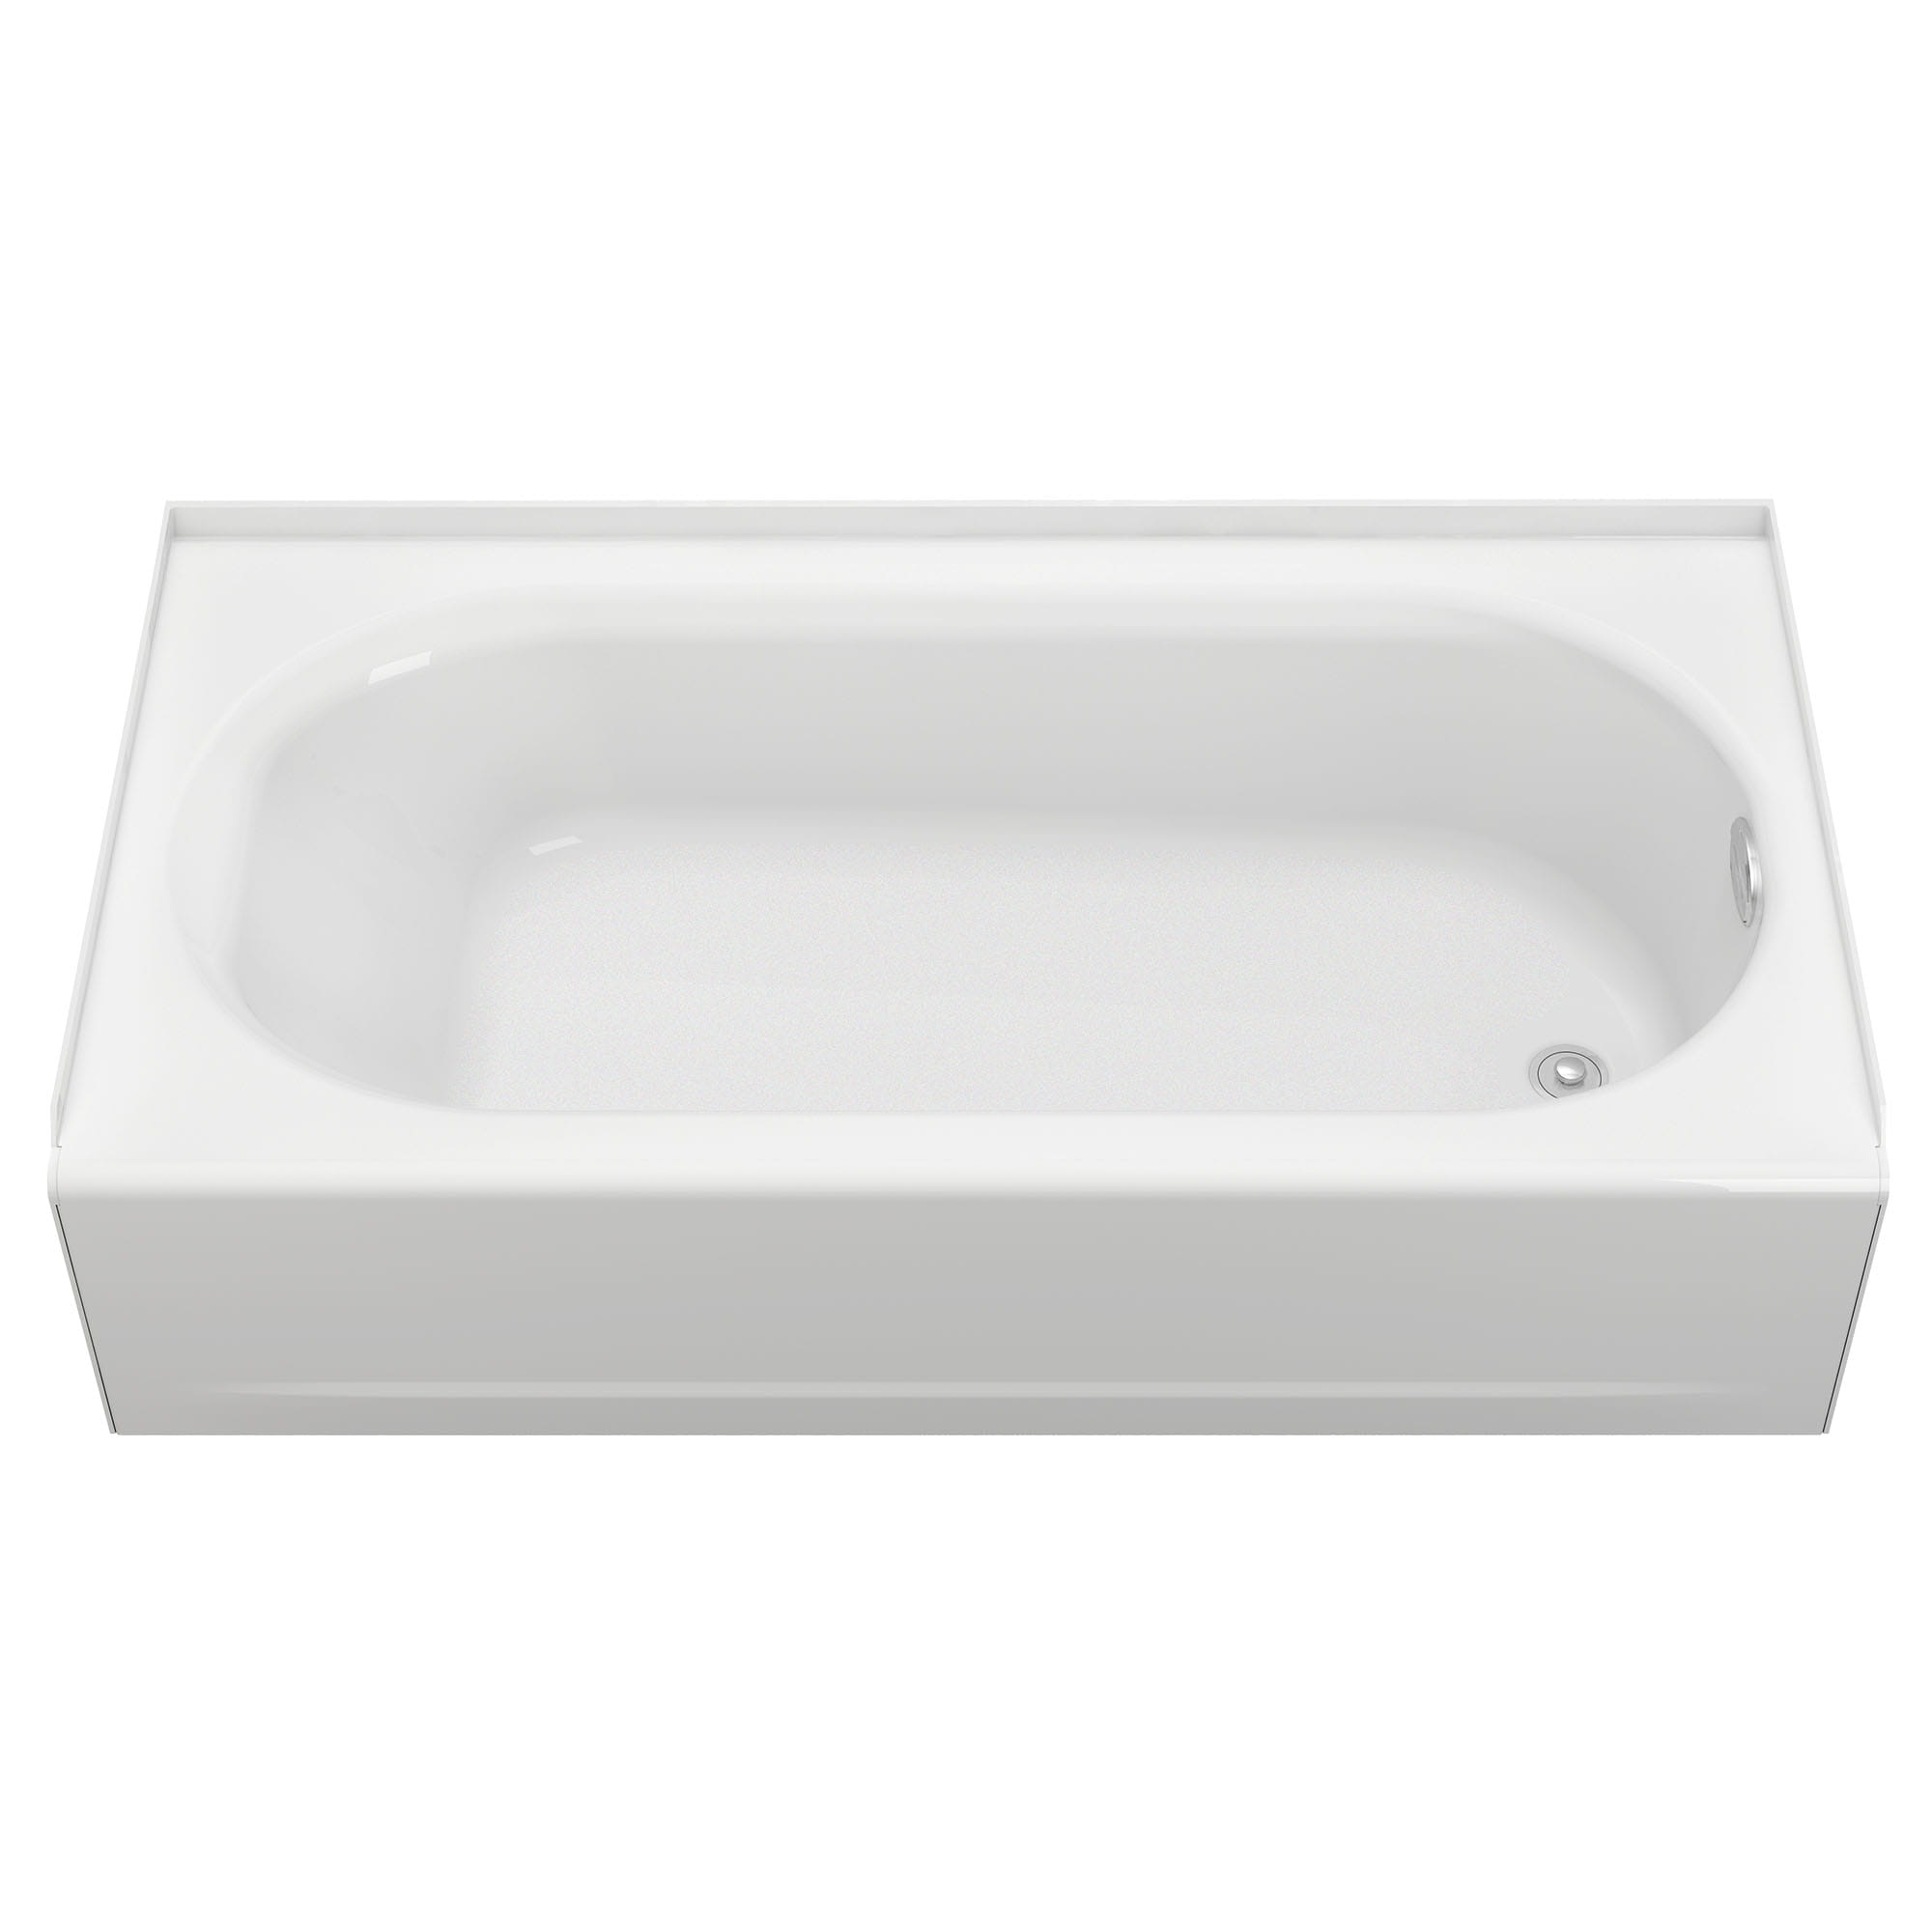 Princeton Americast 60 x 34 Inch Integral Apron Bathtub Above Floor Rough Right Hand Outlet Luxury Ledge with Integral Drain WHITE